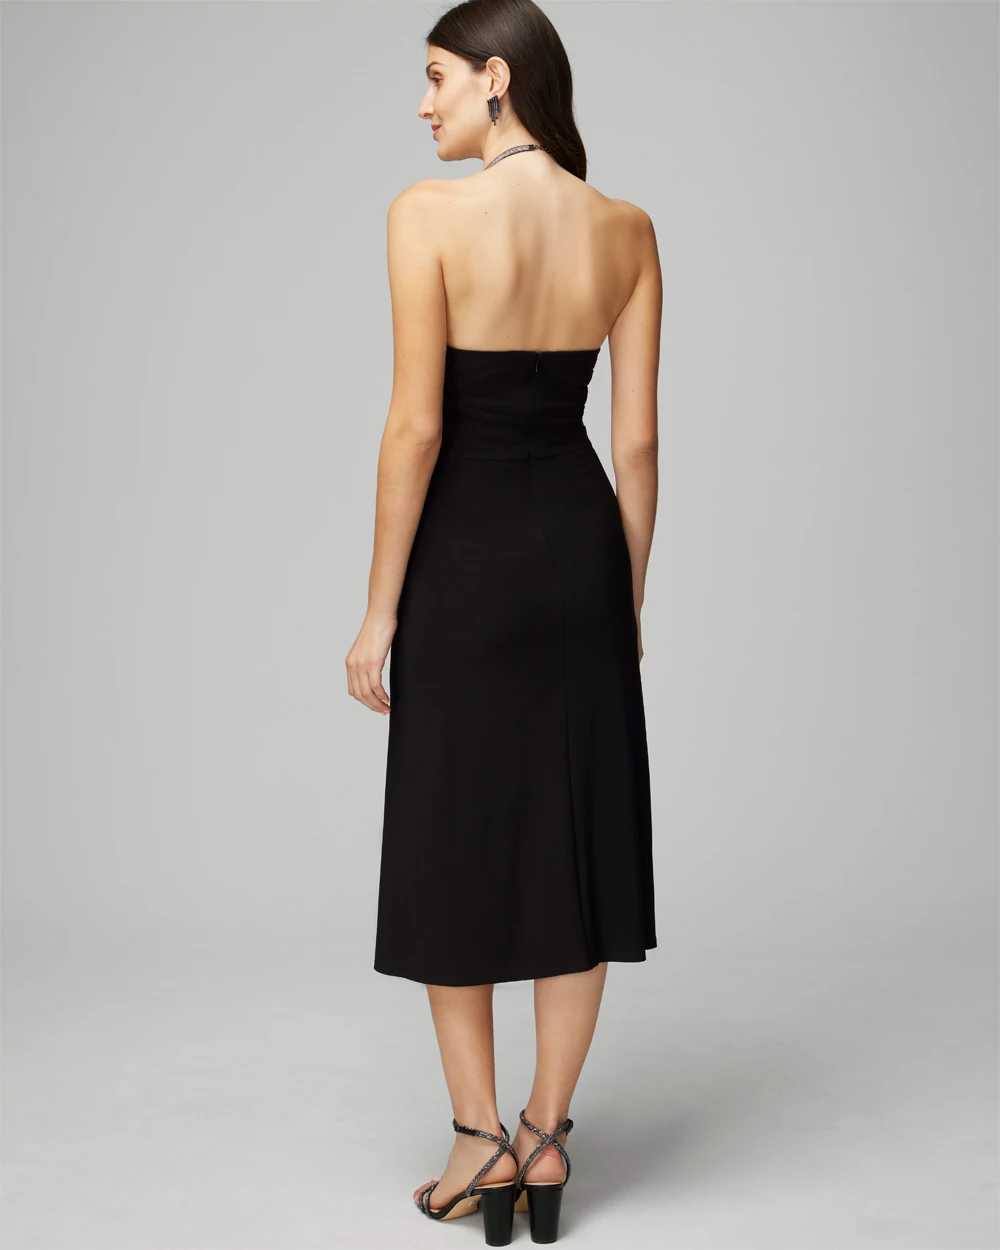 Petite Crystal Halter Ruched Matte Jersey Dress click to view larger image.